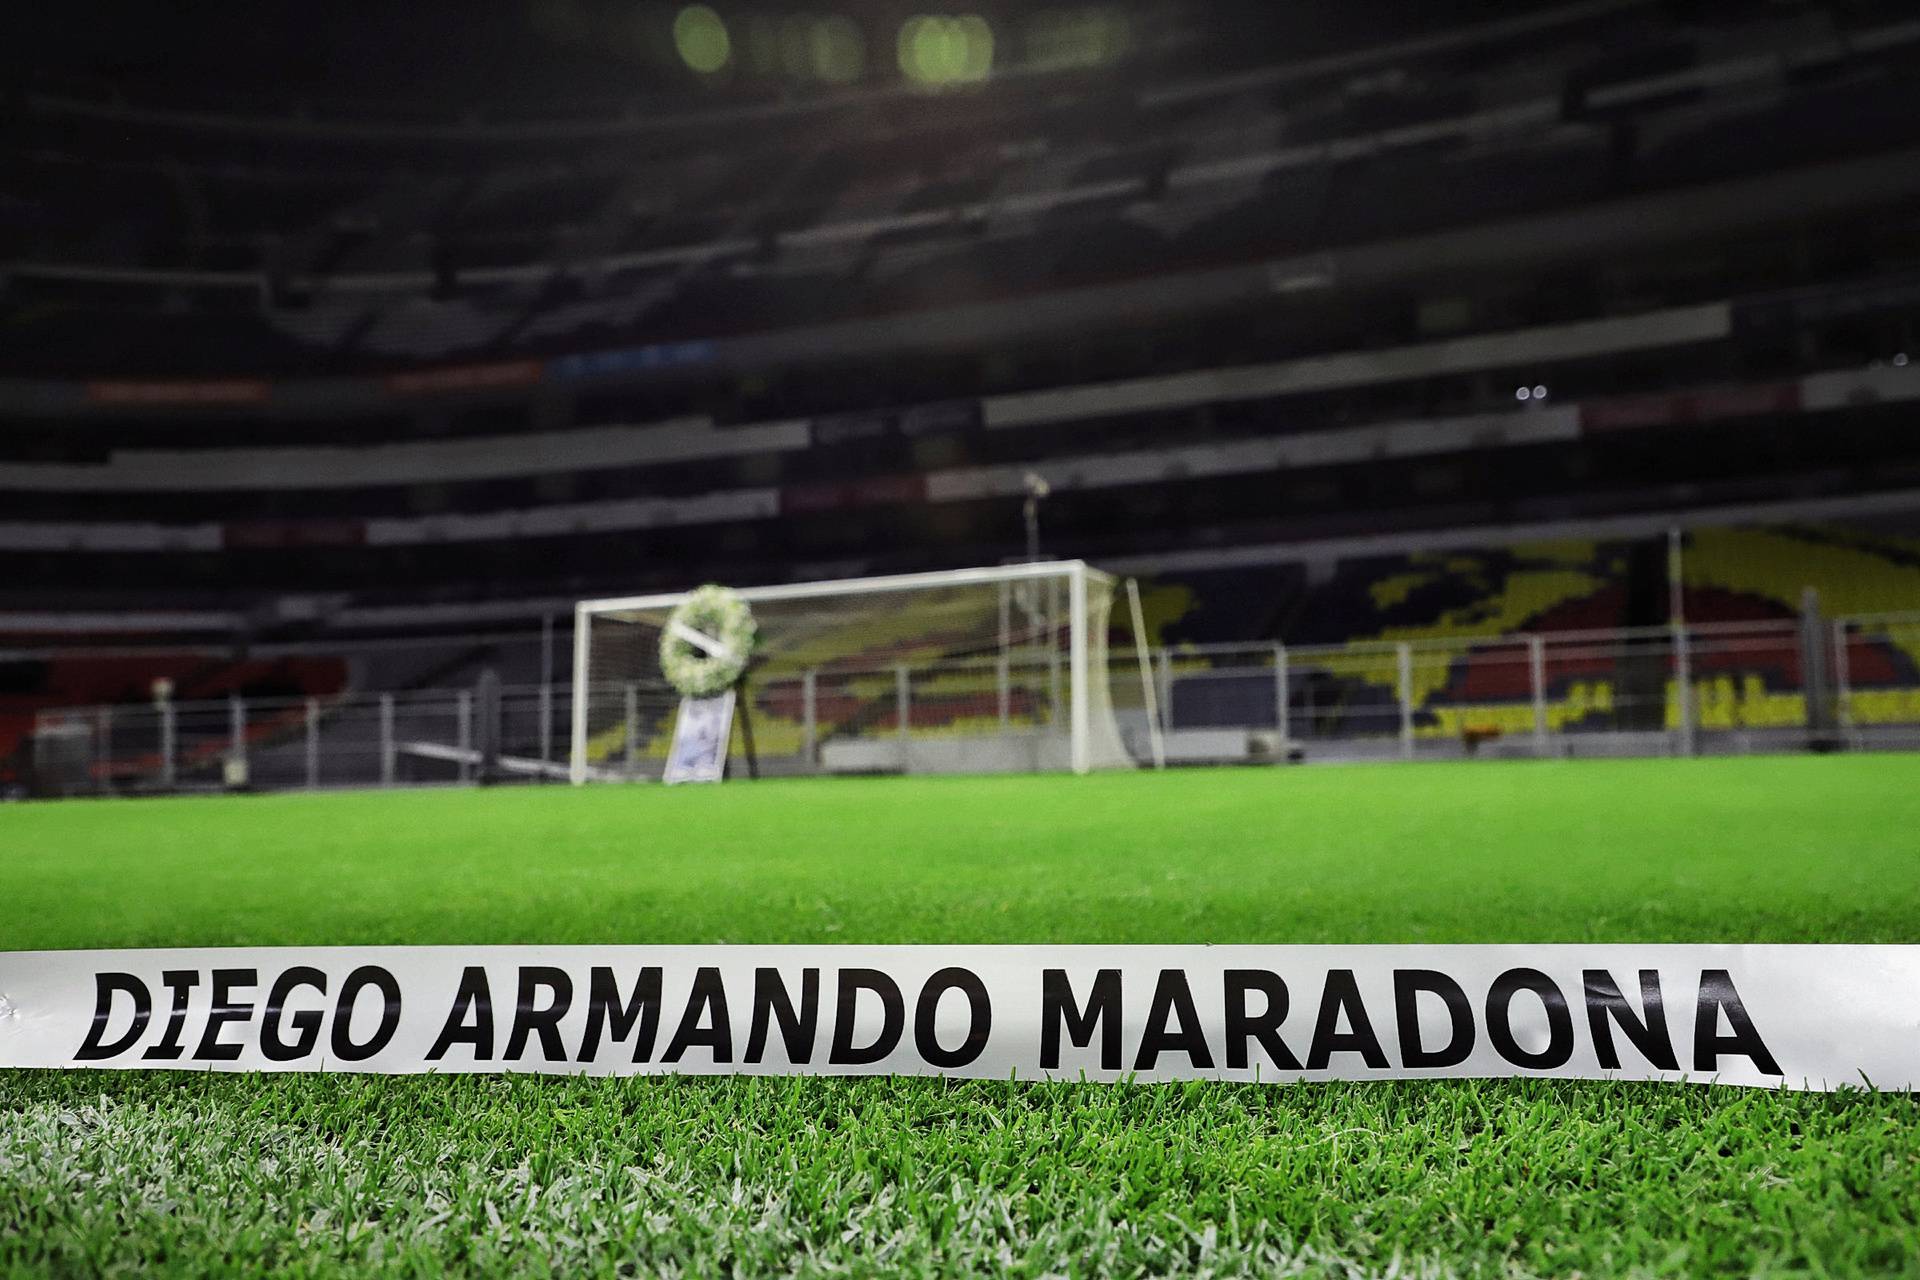 A picture of Maradona and a wreath are placed next to the goal where Maradona scored a goal in the 1986 World Cup, in Mexico City